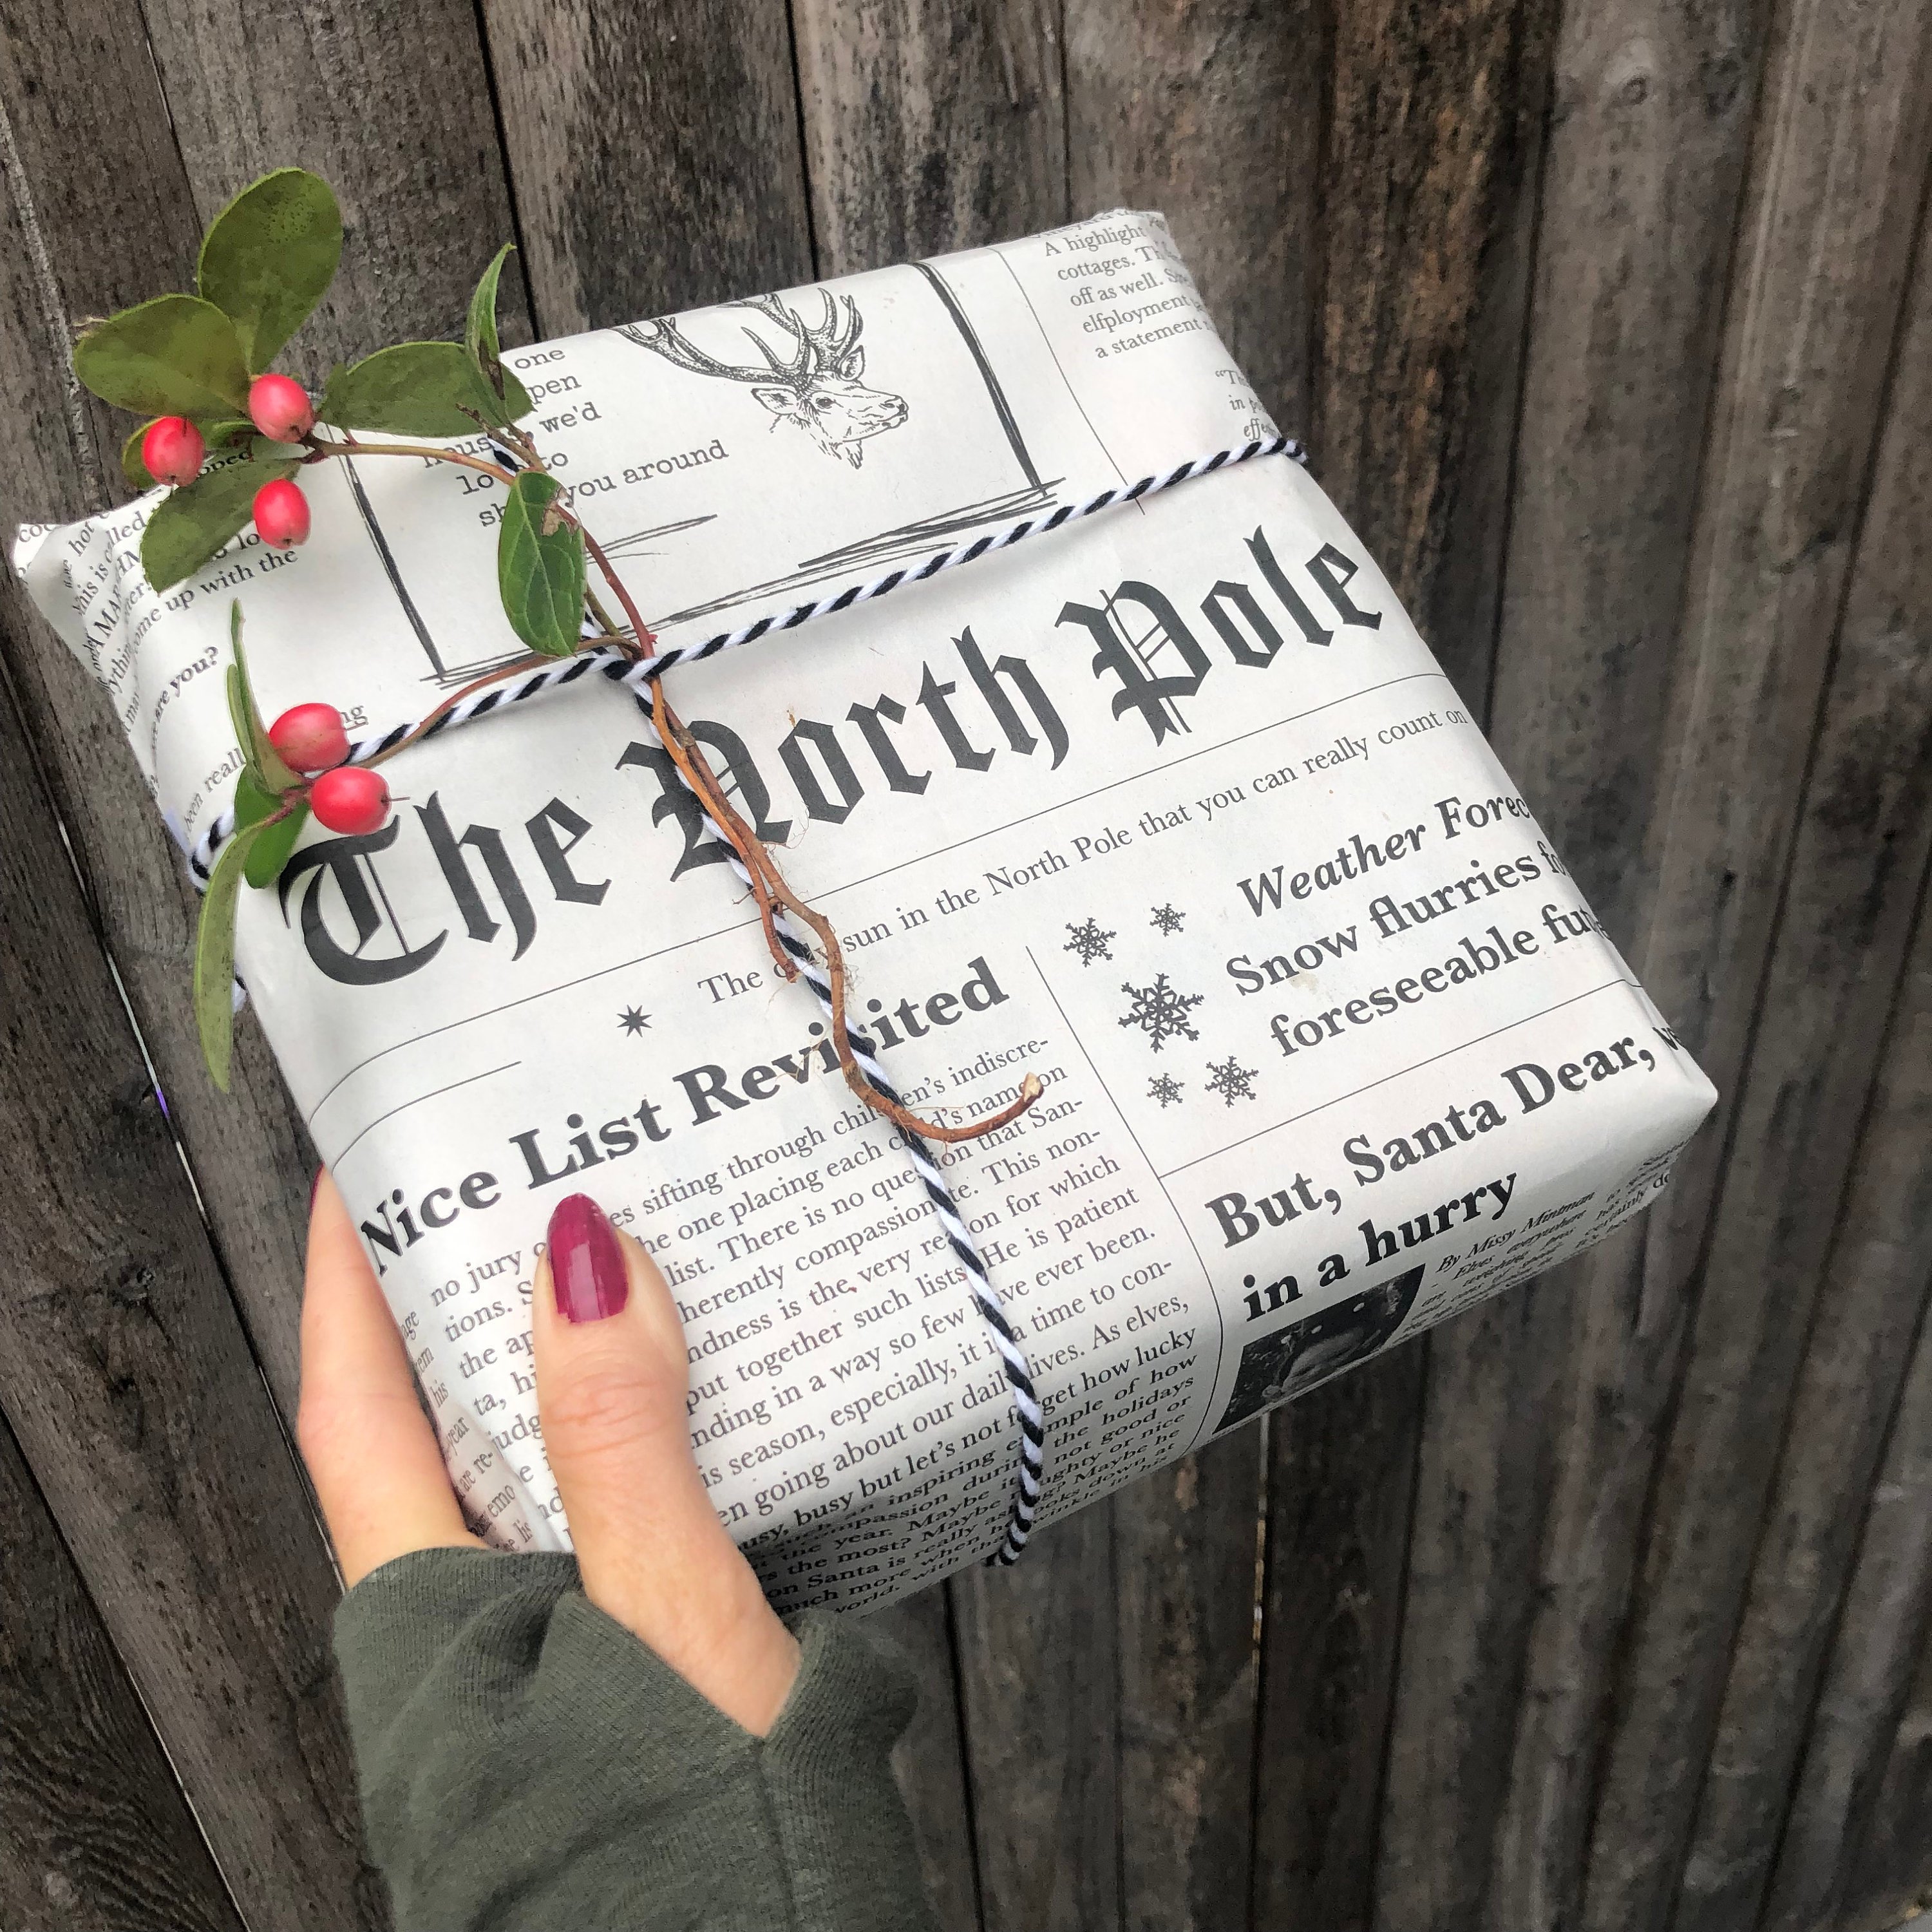 "North Pole" Newspaper-🧑‍🎄Christmas wrapping paper|eco-friendly